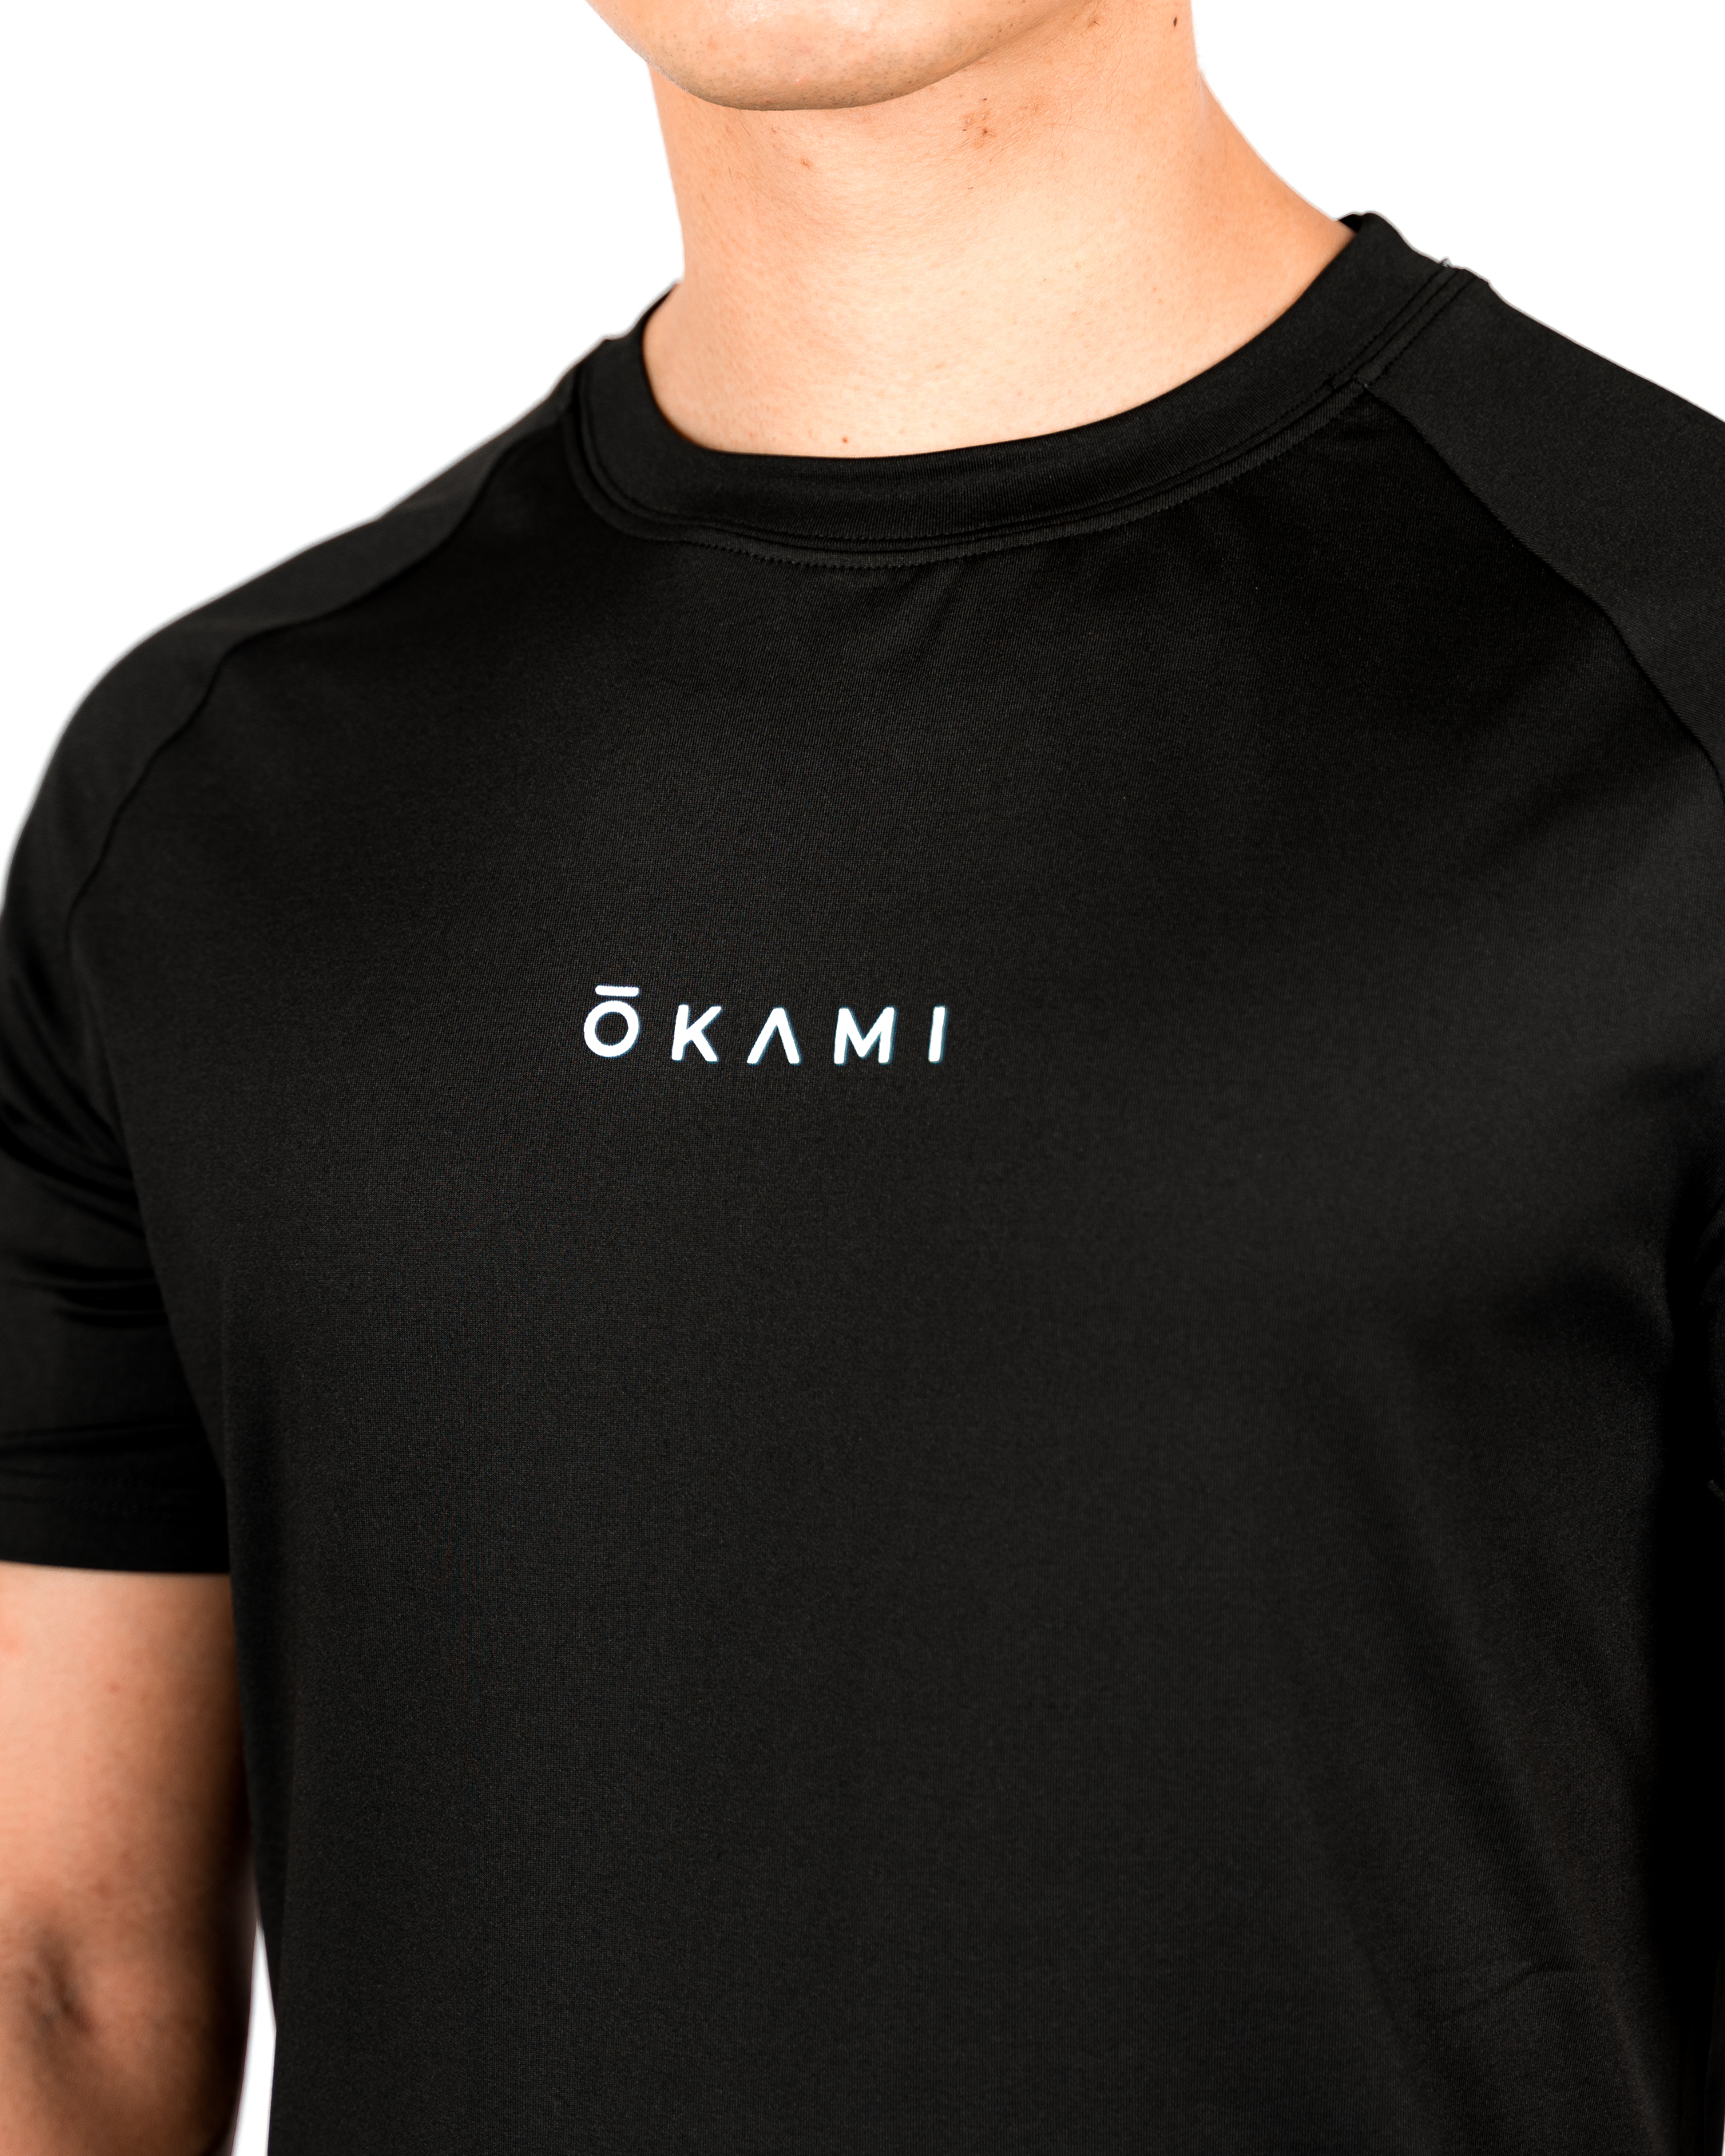 001 - Black Fitted Tee